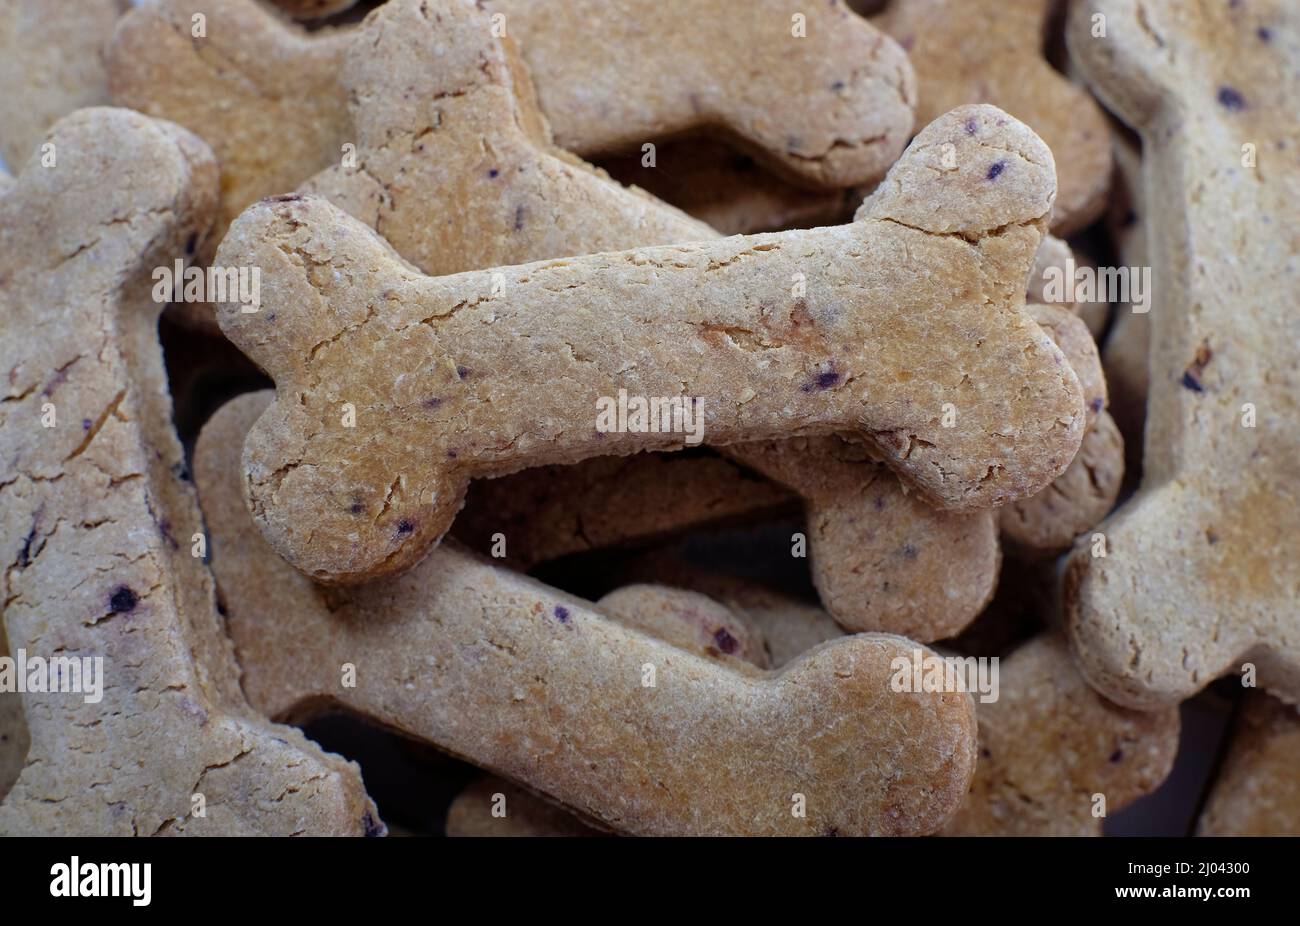 close up of small bone shaped dog biscuits Stock Photo